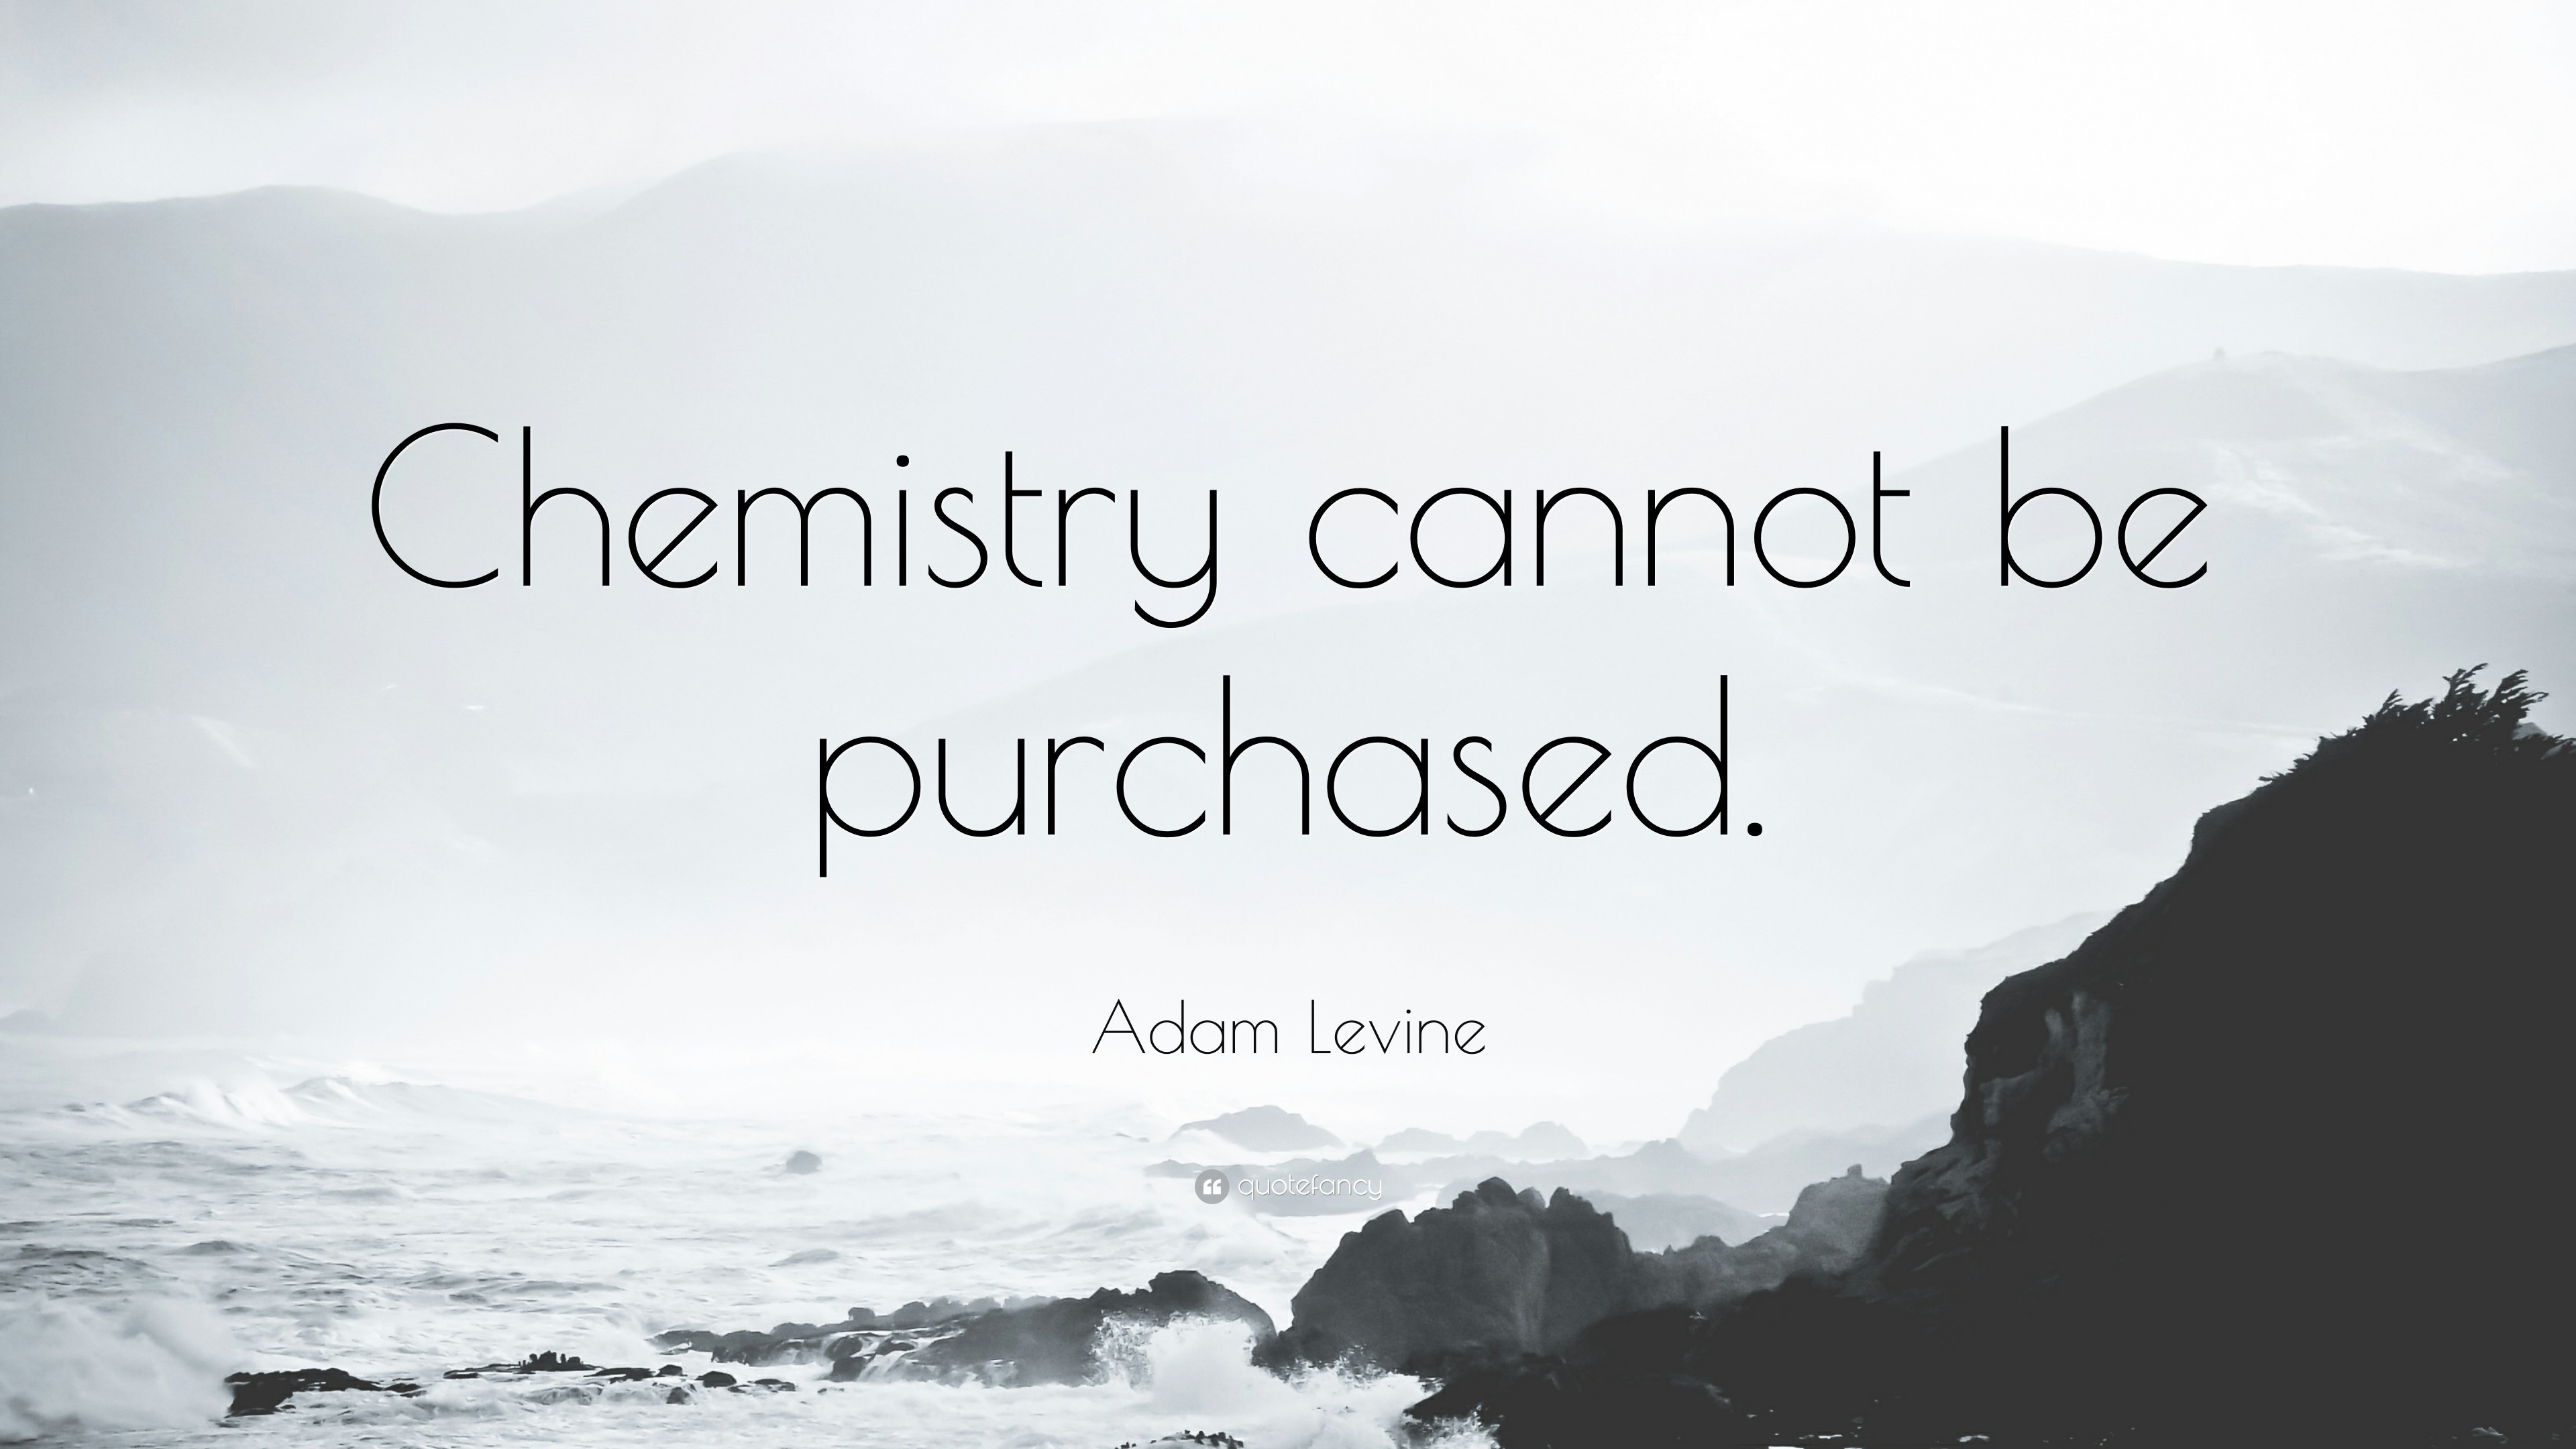 3840x2160 Adam Levine Quote: “Chemistry cannot be purchased.”